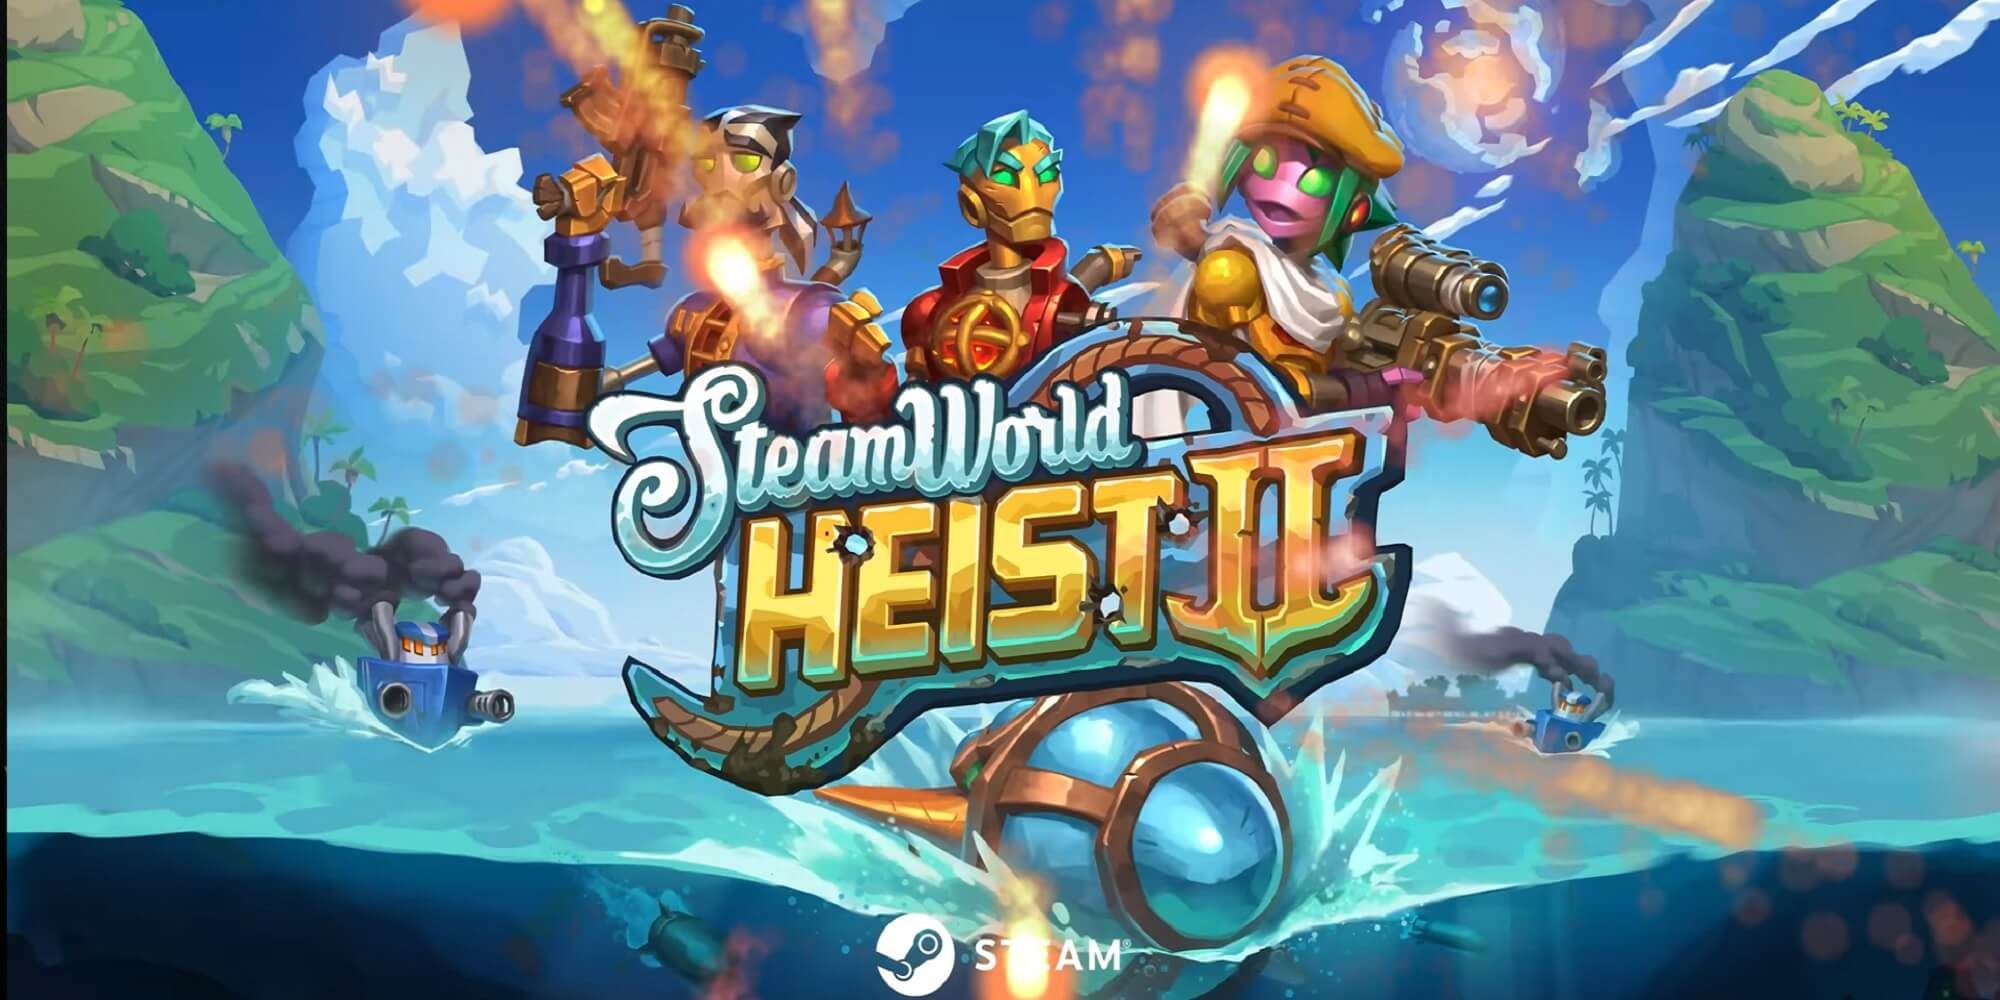 Steamworld Heist 2 image showing three characters above the logo that is riding on a missile sailing across the sea